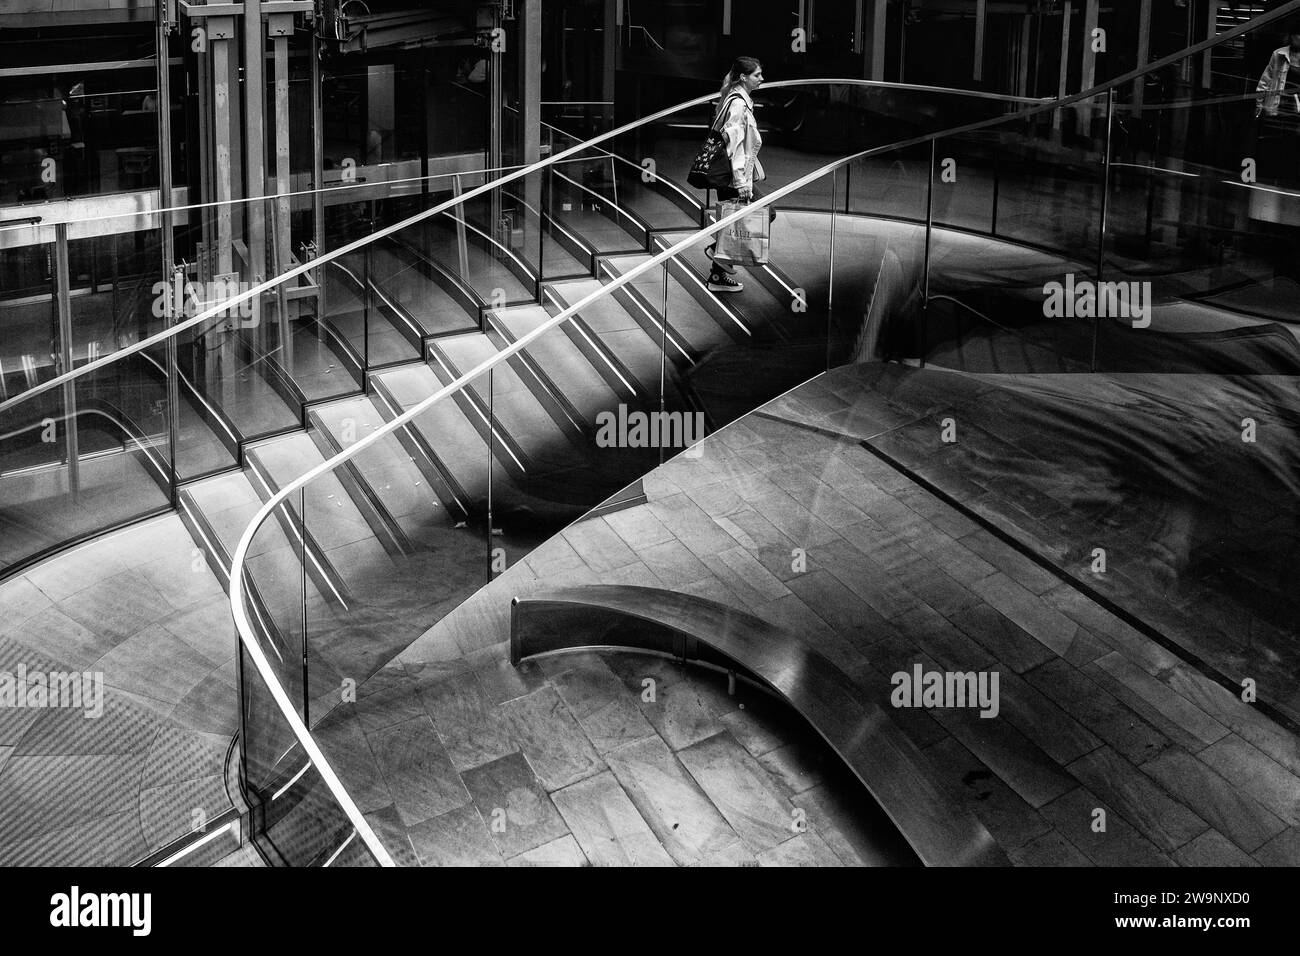 Black & white image of female holding shopping bag & walking up curved staircase Modern, indoor setting. Empty, curved metal bench on floor below. Stock Photo